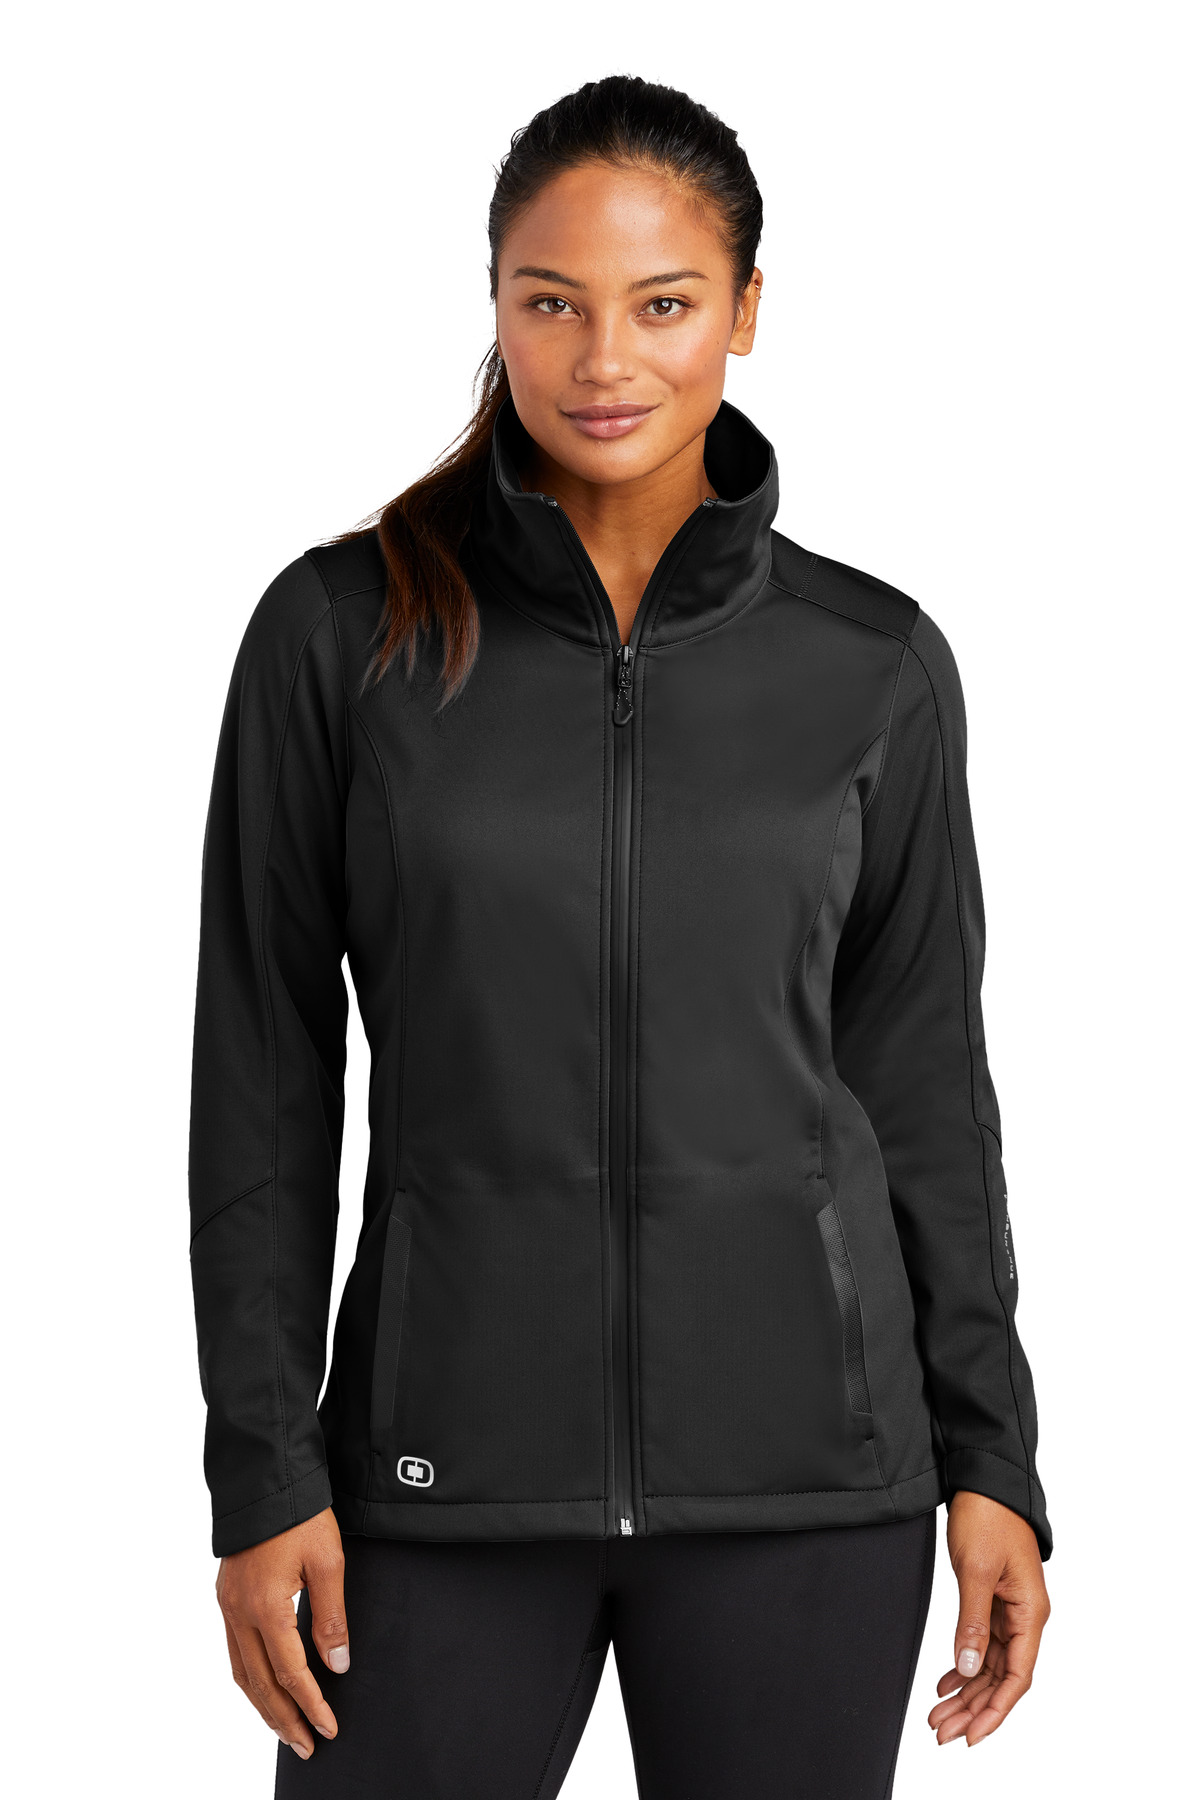 OGIO Ladies Activewear & Outerwear for Hospitality ® ENDURANCE Ladies Crux Soft Shell.-OGIO